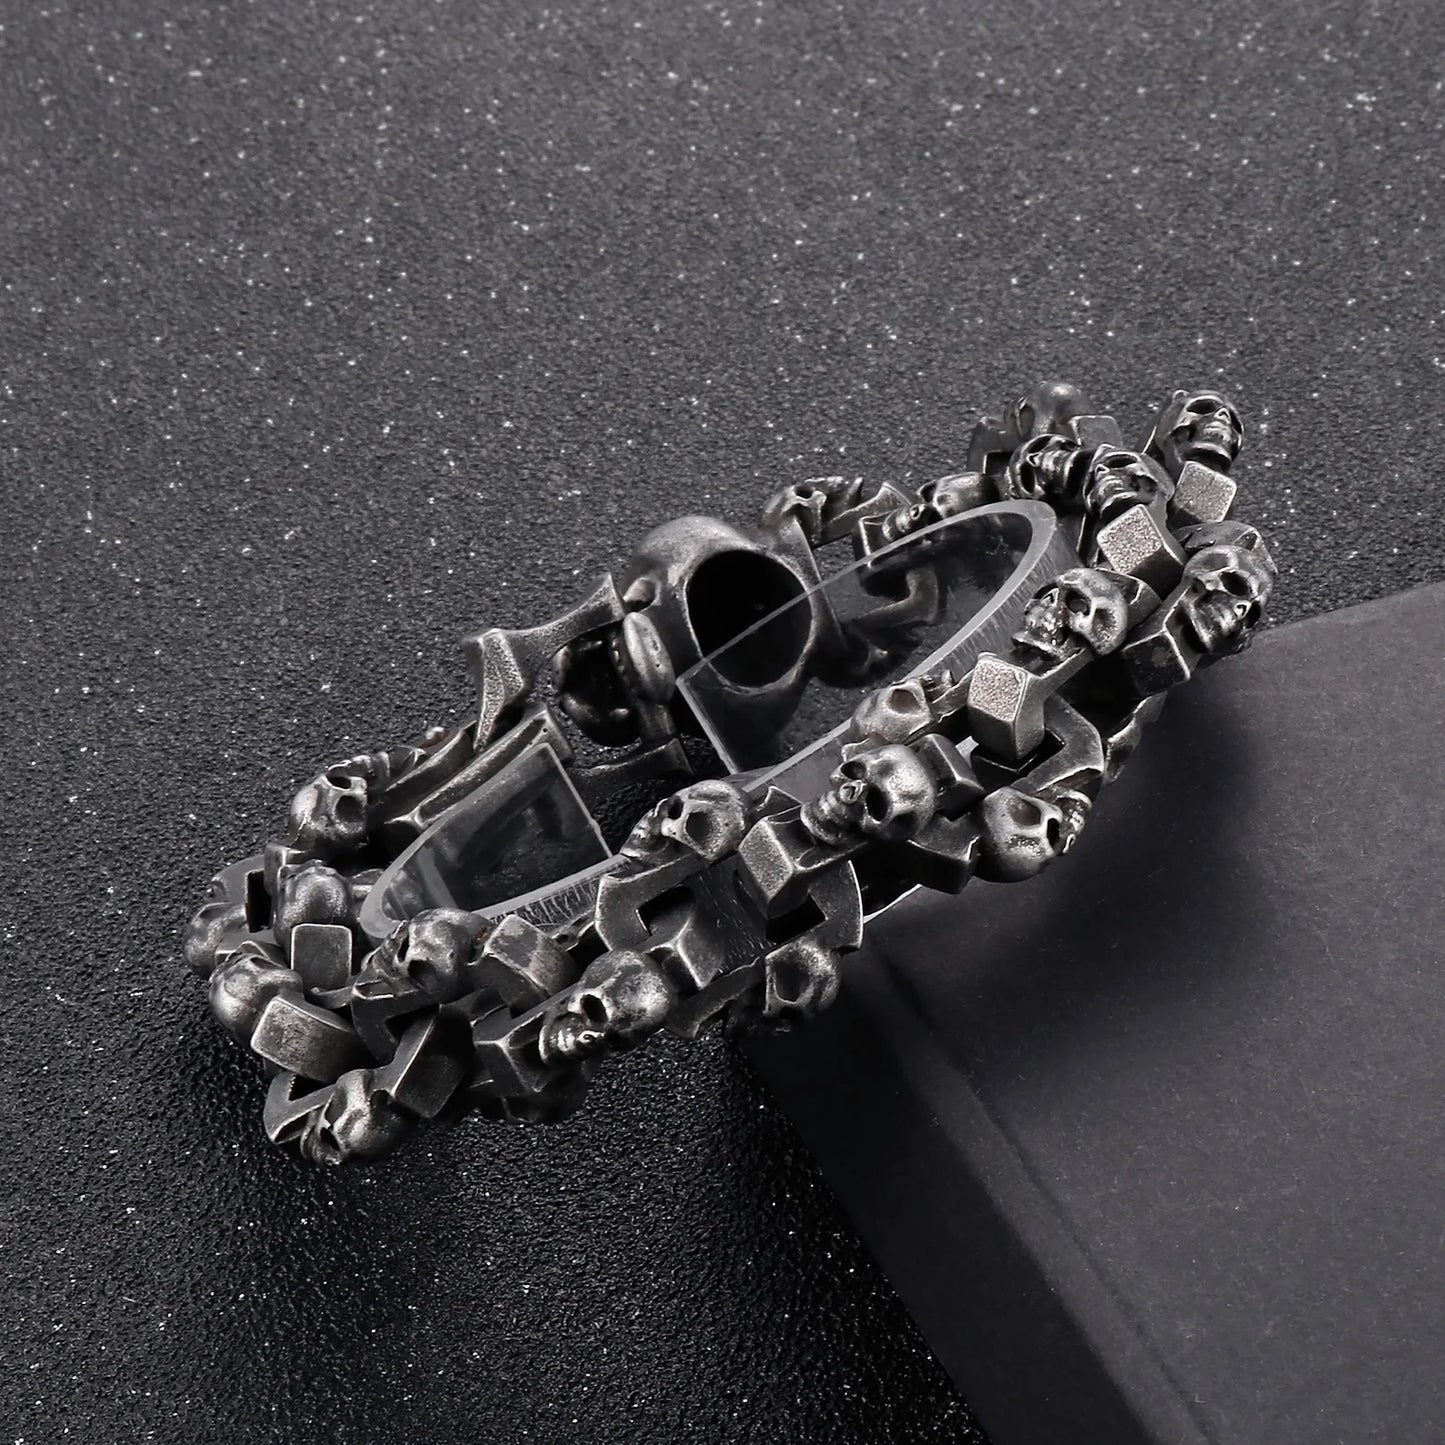 Gothic Ghost Matte Steel Bracelet with Bull Dog Accent. Badass bracelet for men. Cool gift for cool man. Badass gift for bikers. Badass jewelry. Badass biker skull jewelry. Badass skulll accessories. Badass gift for badass. Badass skull accessories. Badass skull jewelry. Christmas gift for badass. Christmas gift for bikers. Christmas gifts for tattoo artists.